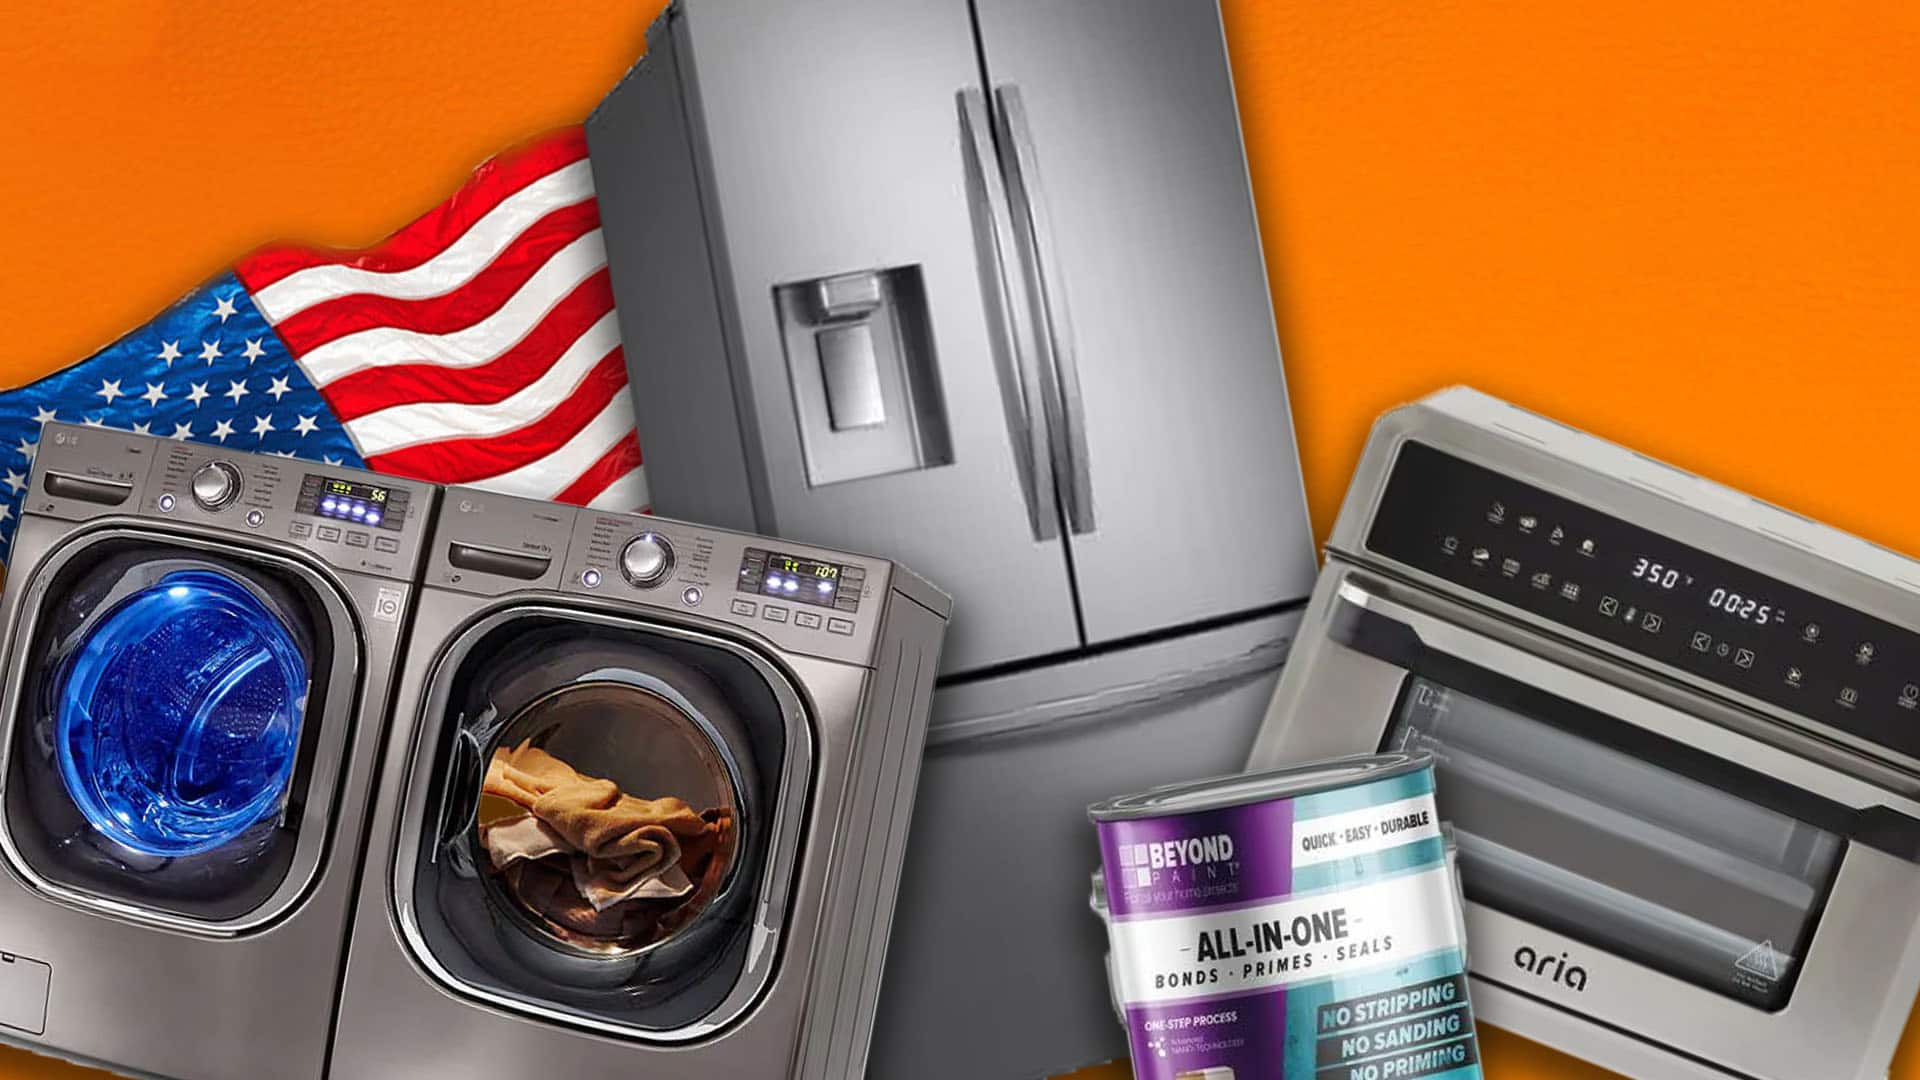 Home Depot Labor Day Sale Deals & Offers